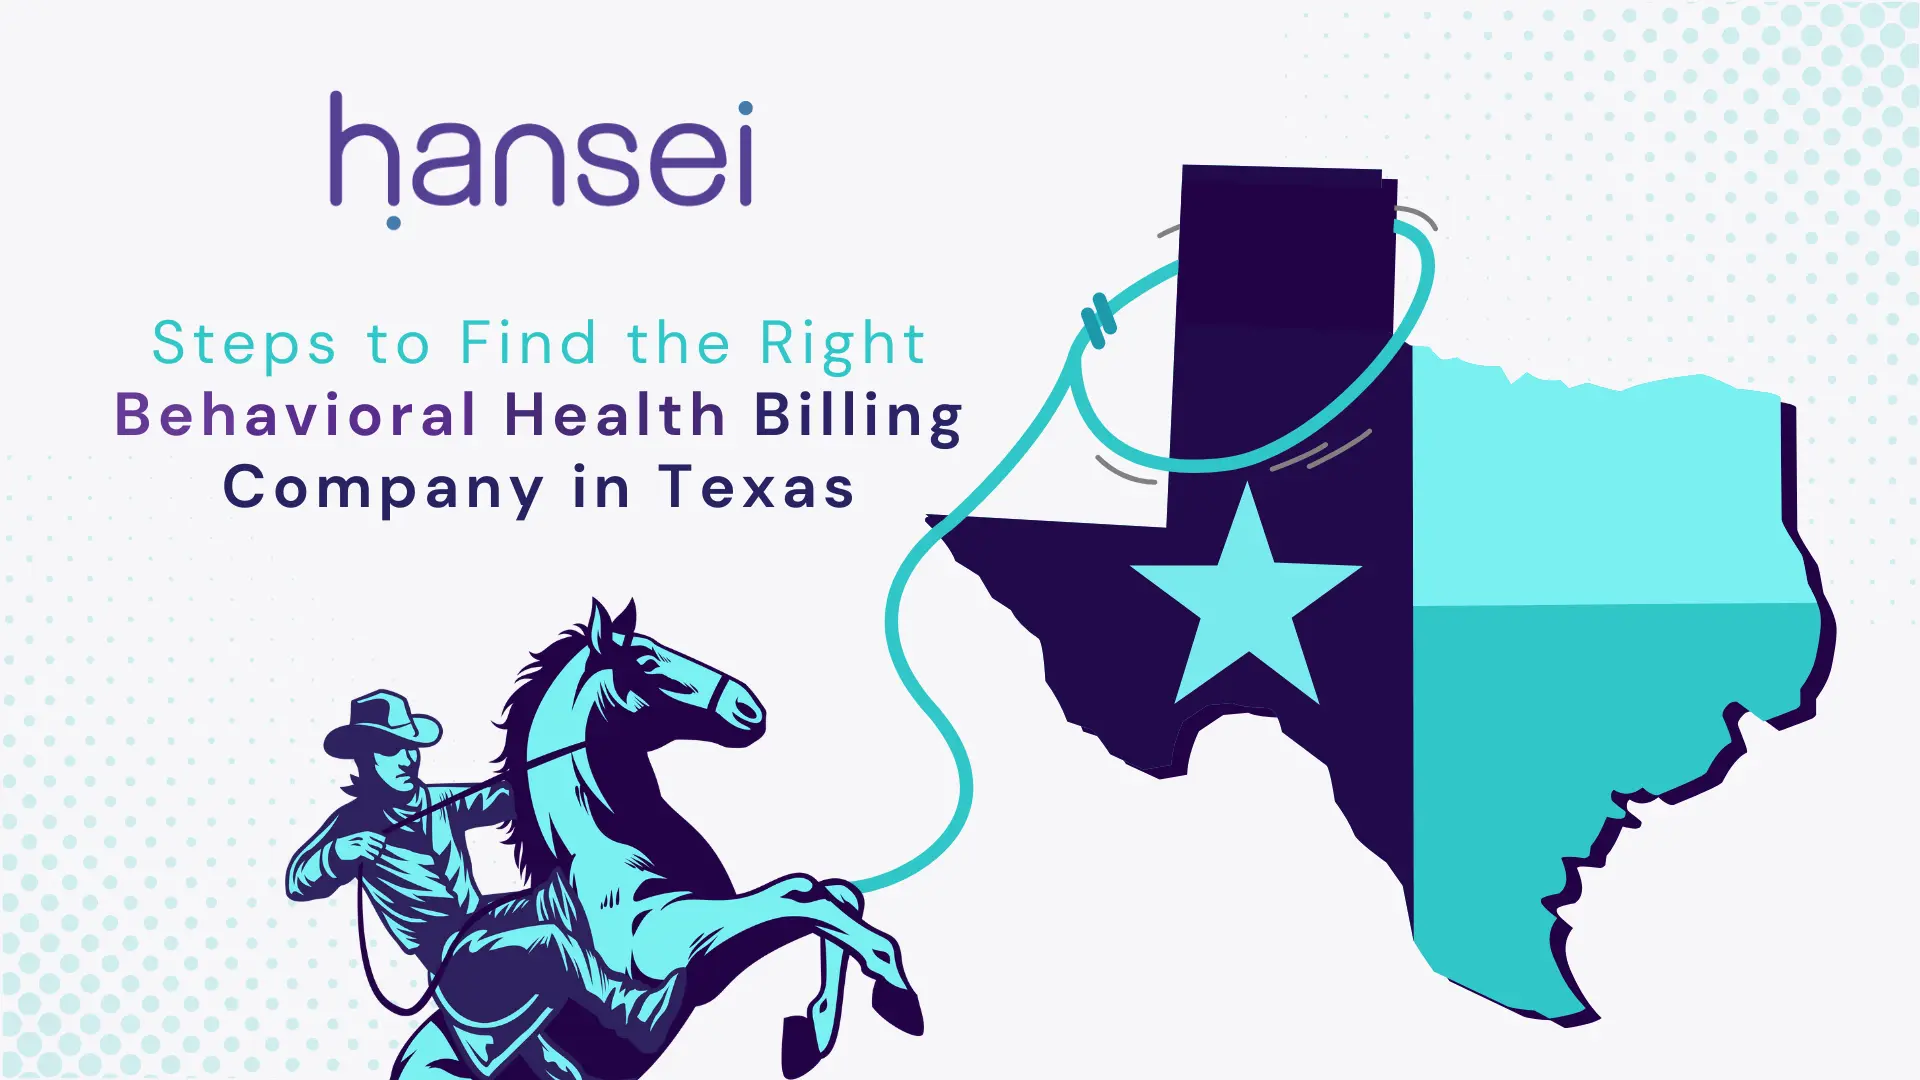 Steps to Find the Right Behavioral Health Billing Company in Texas